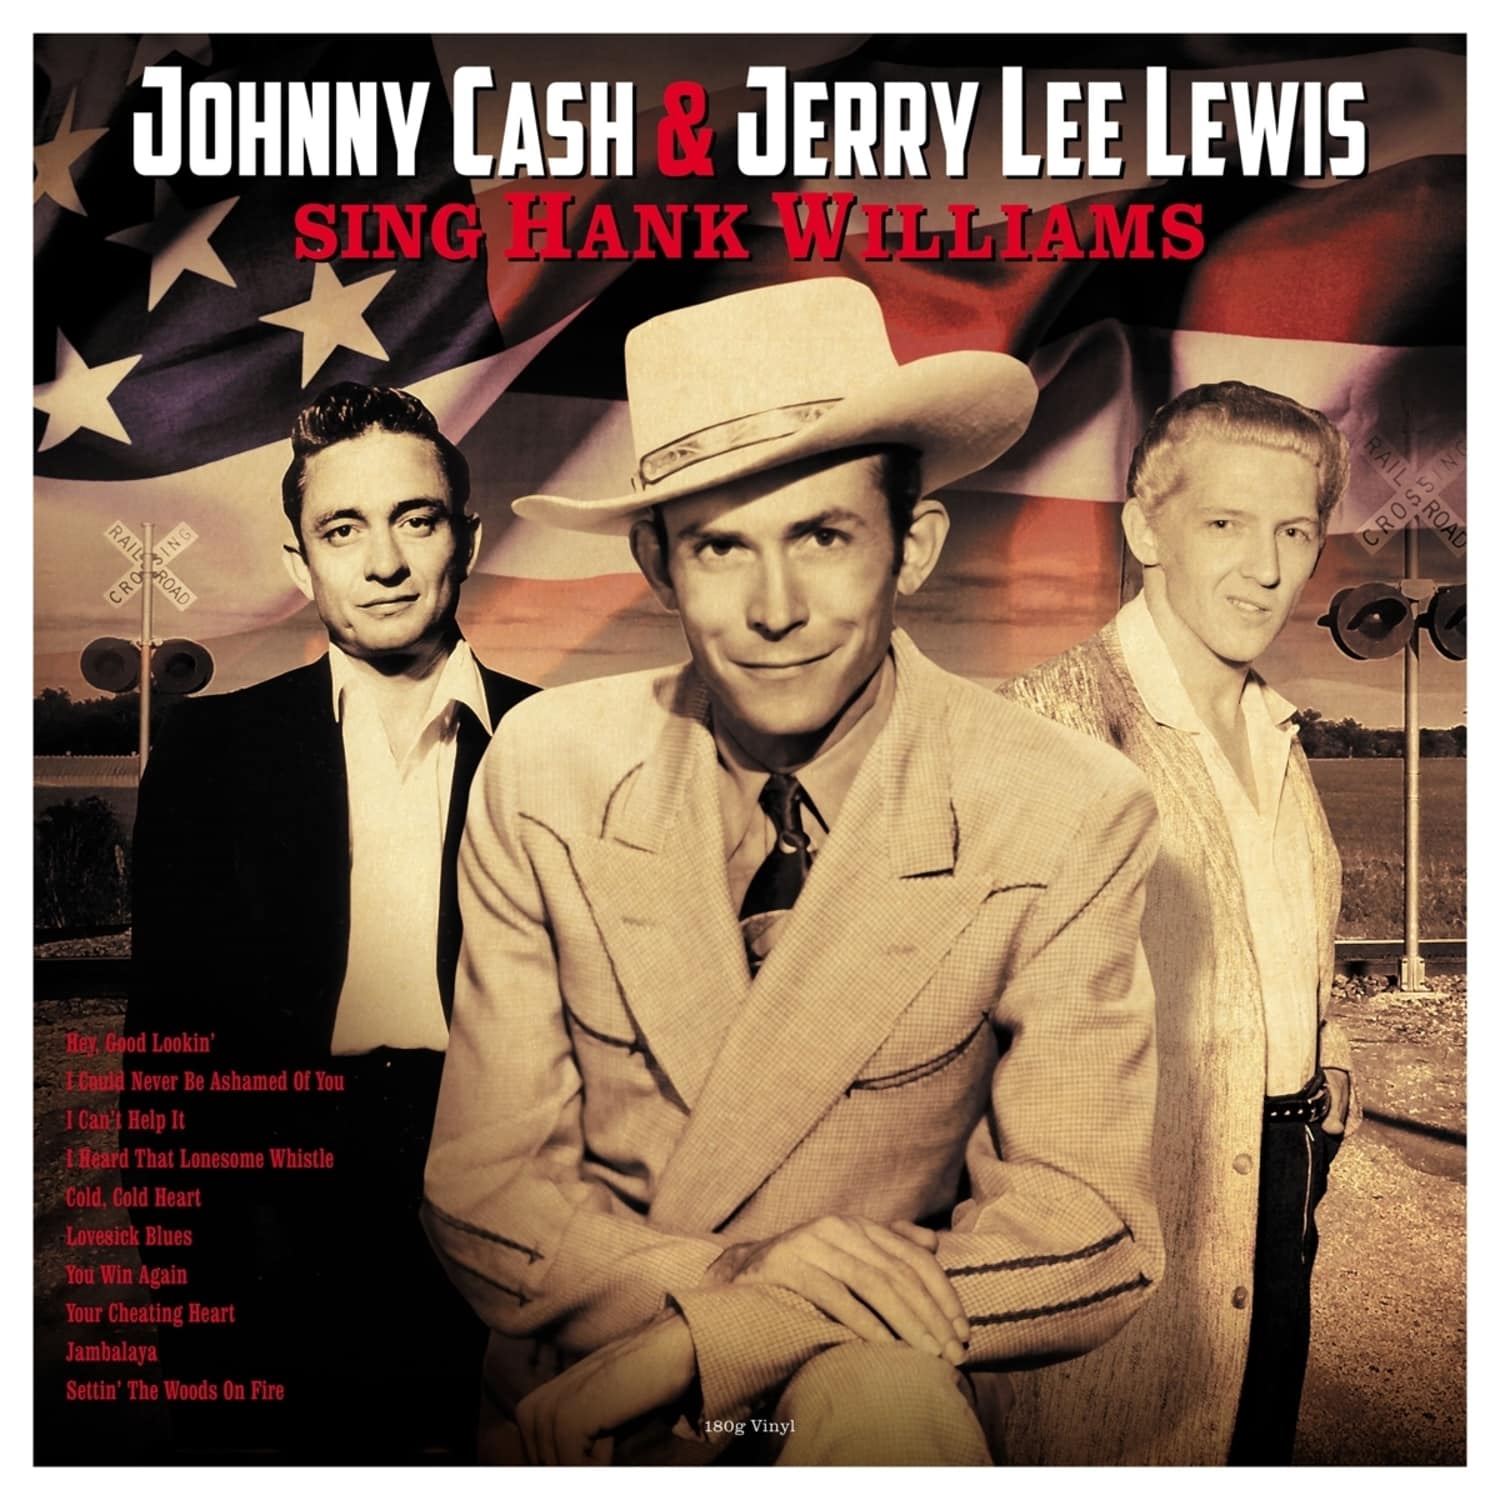 Jerry Lee Lewis & Johnny Cash - SING HANK WILLIAMS 